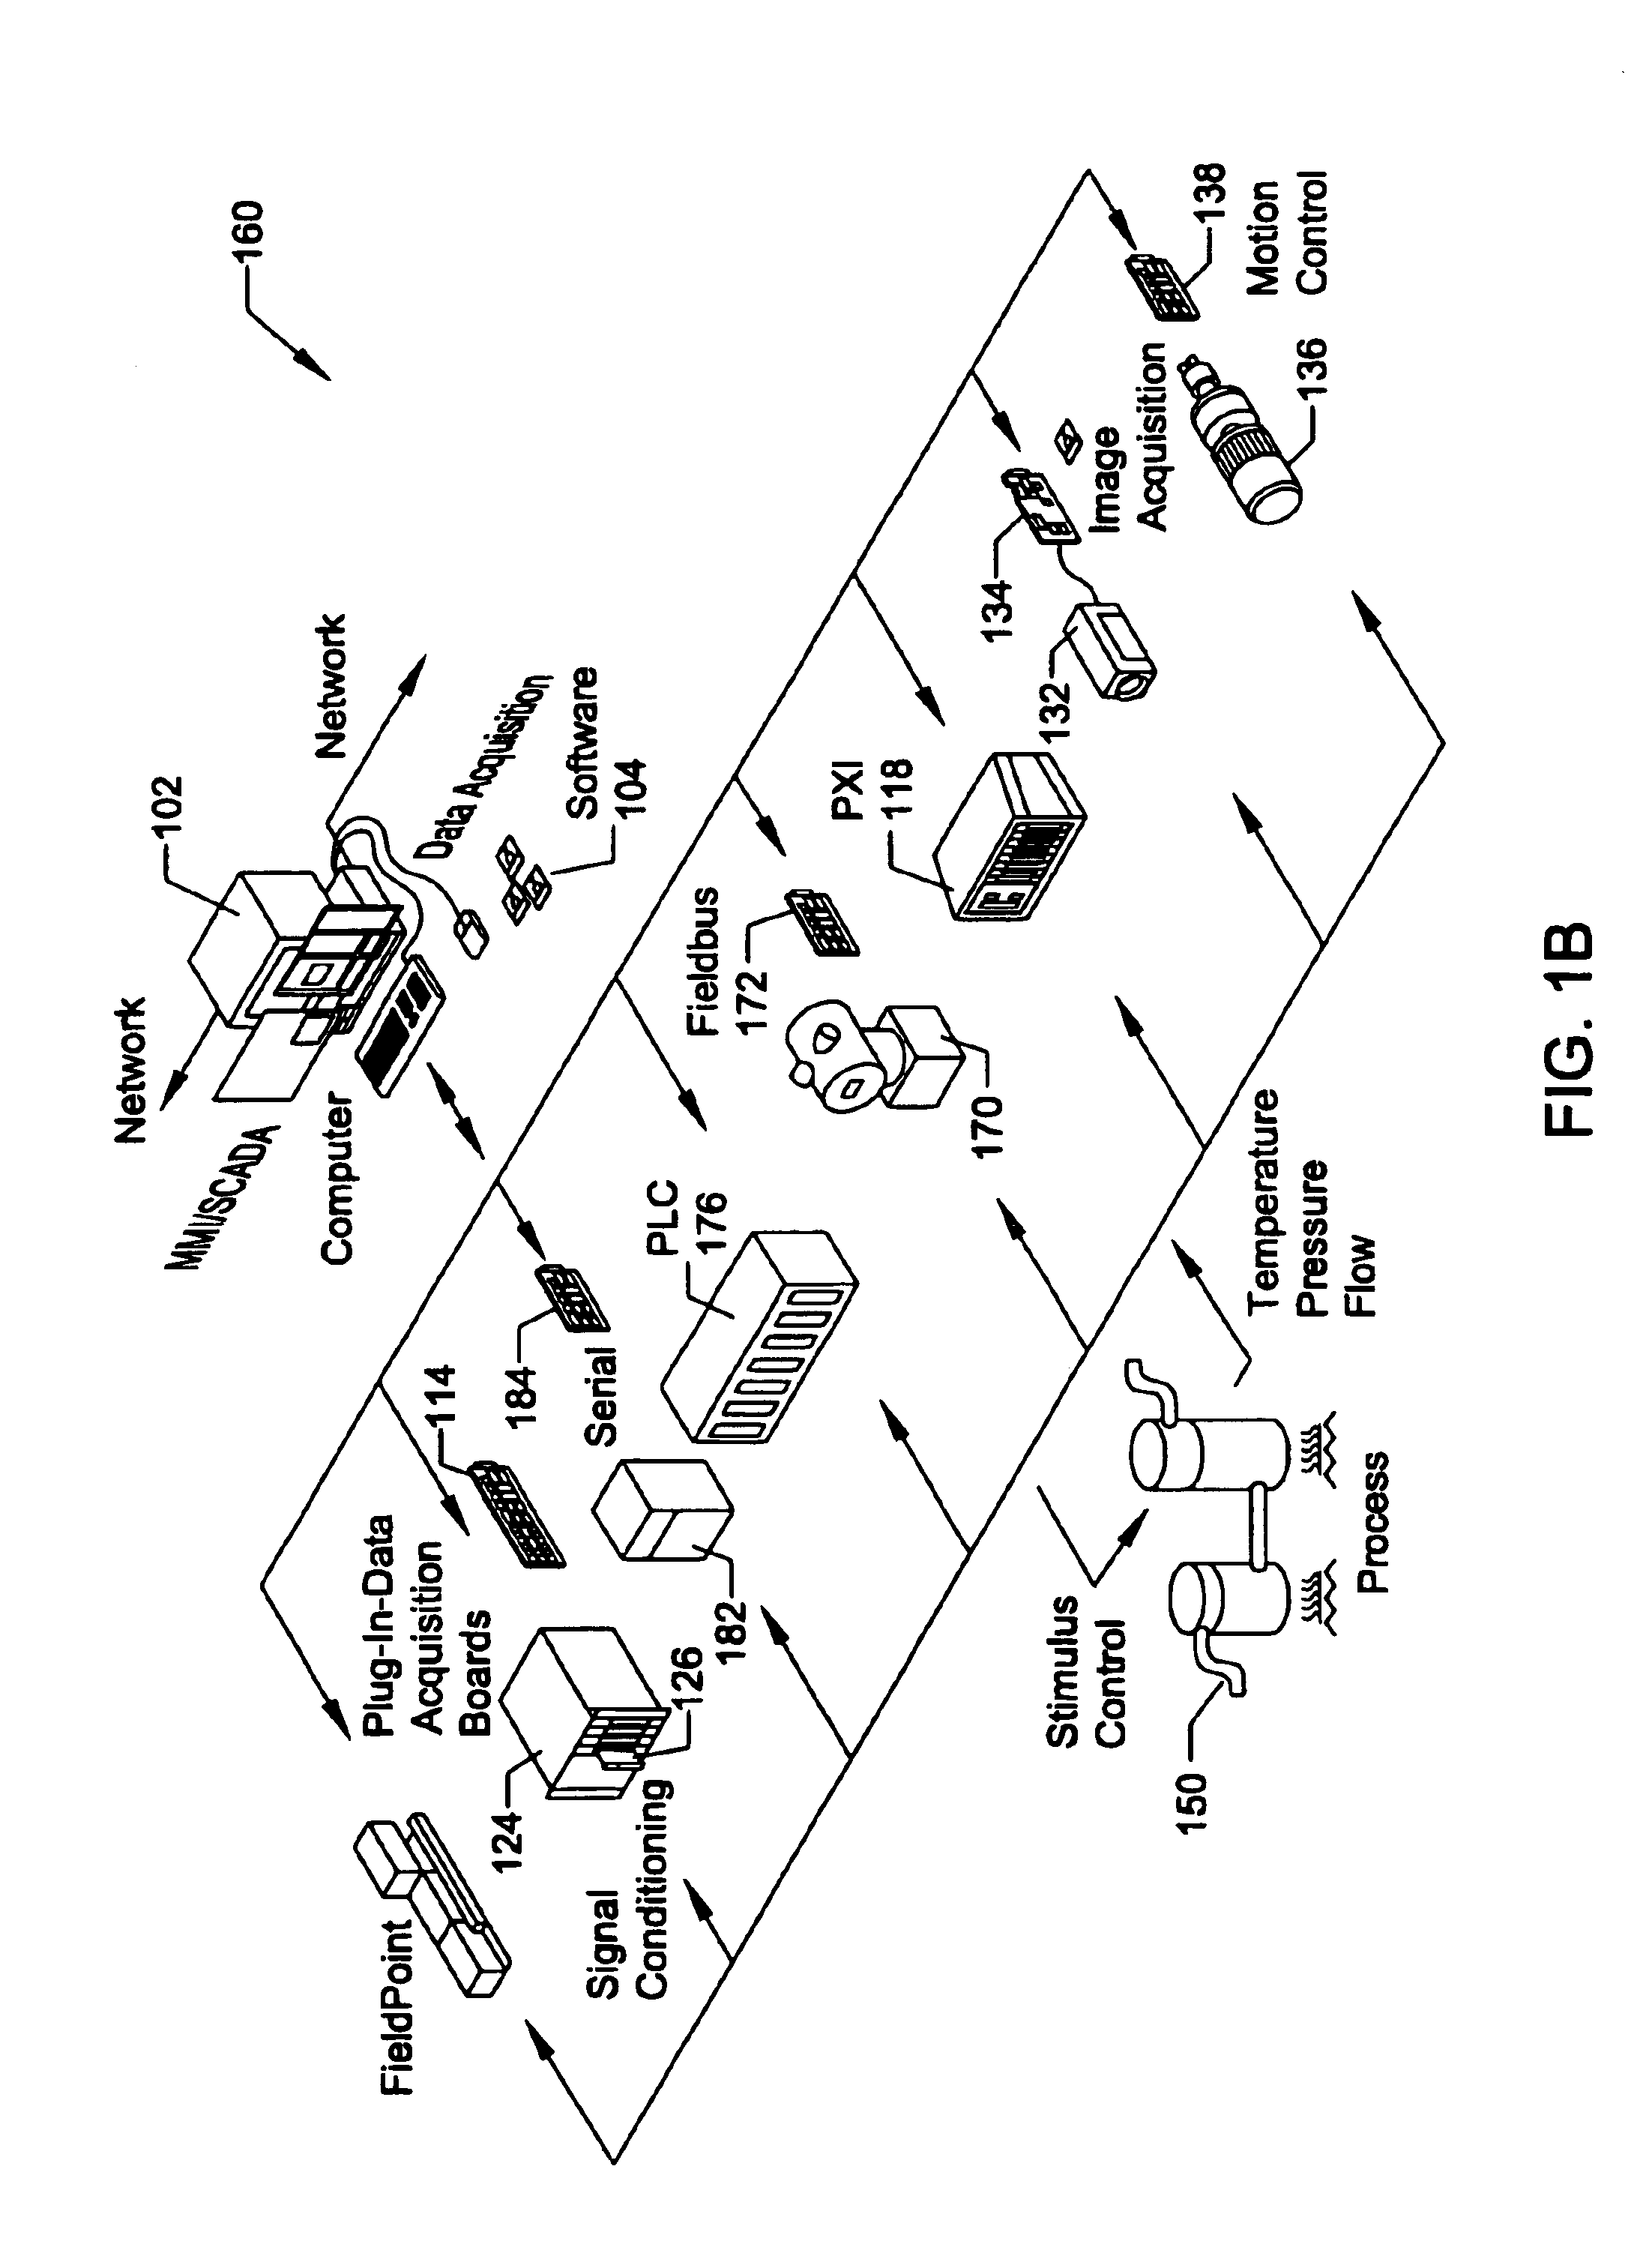 System and method for exporting a graphical program to a shared library